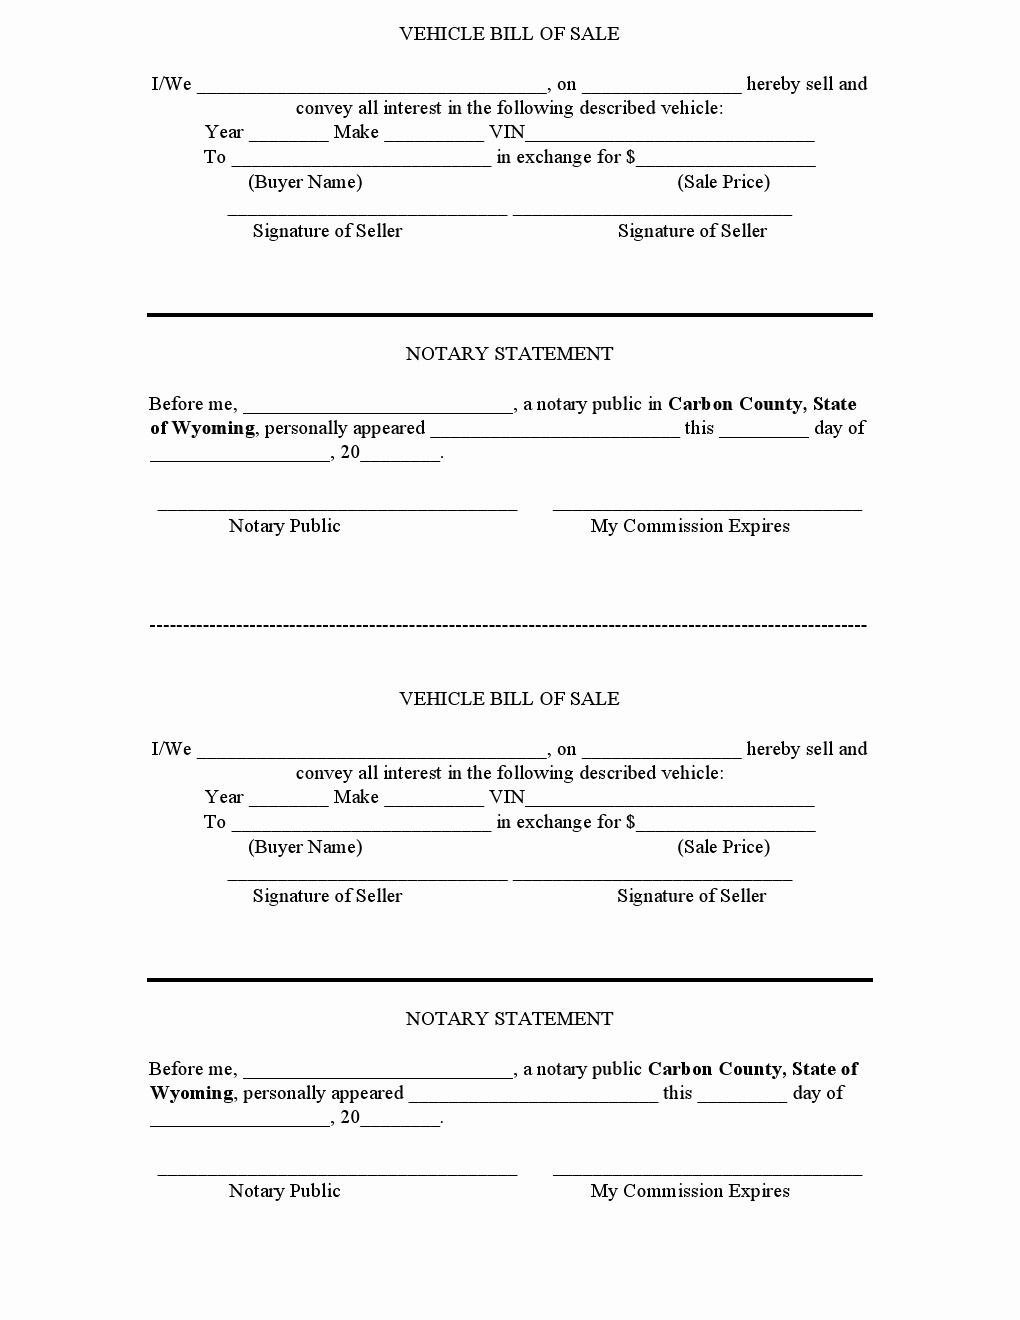 Ga Automobile Bill Of Sale Fresh Free Carbon Country Vehicle Bill Of Sale form Download